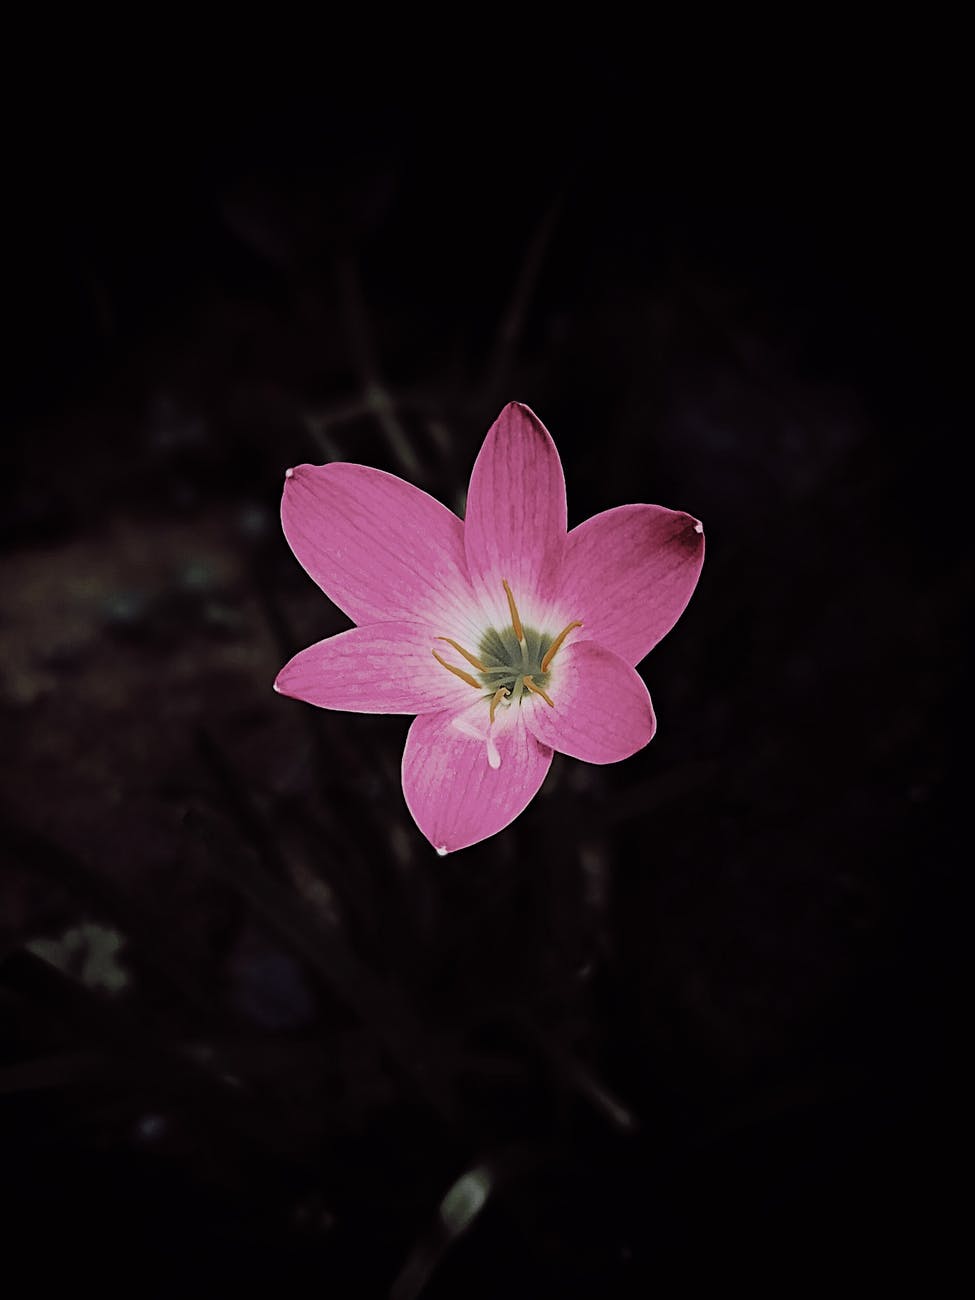 small flower growing in night